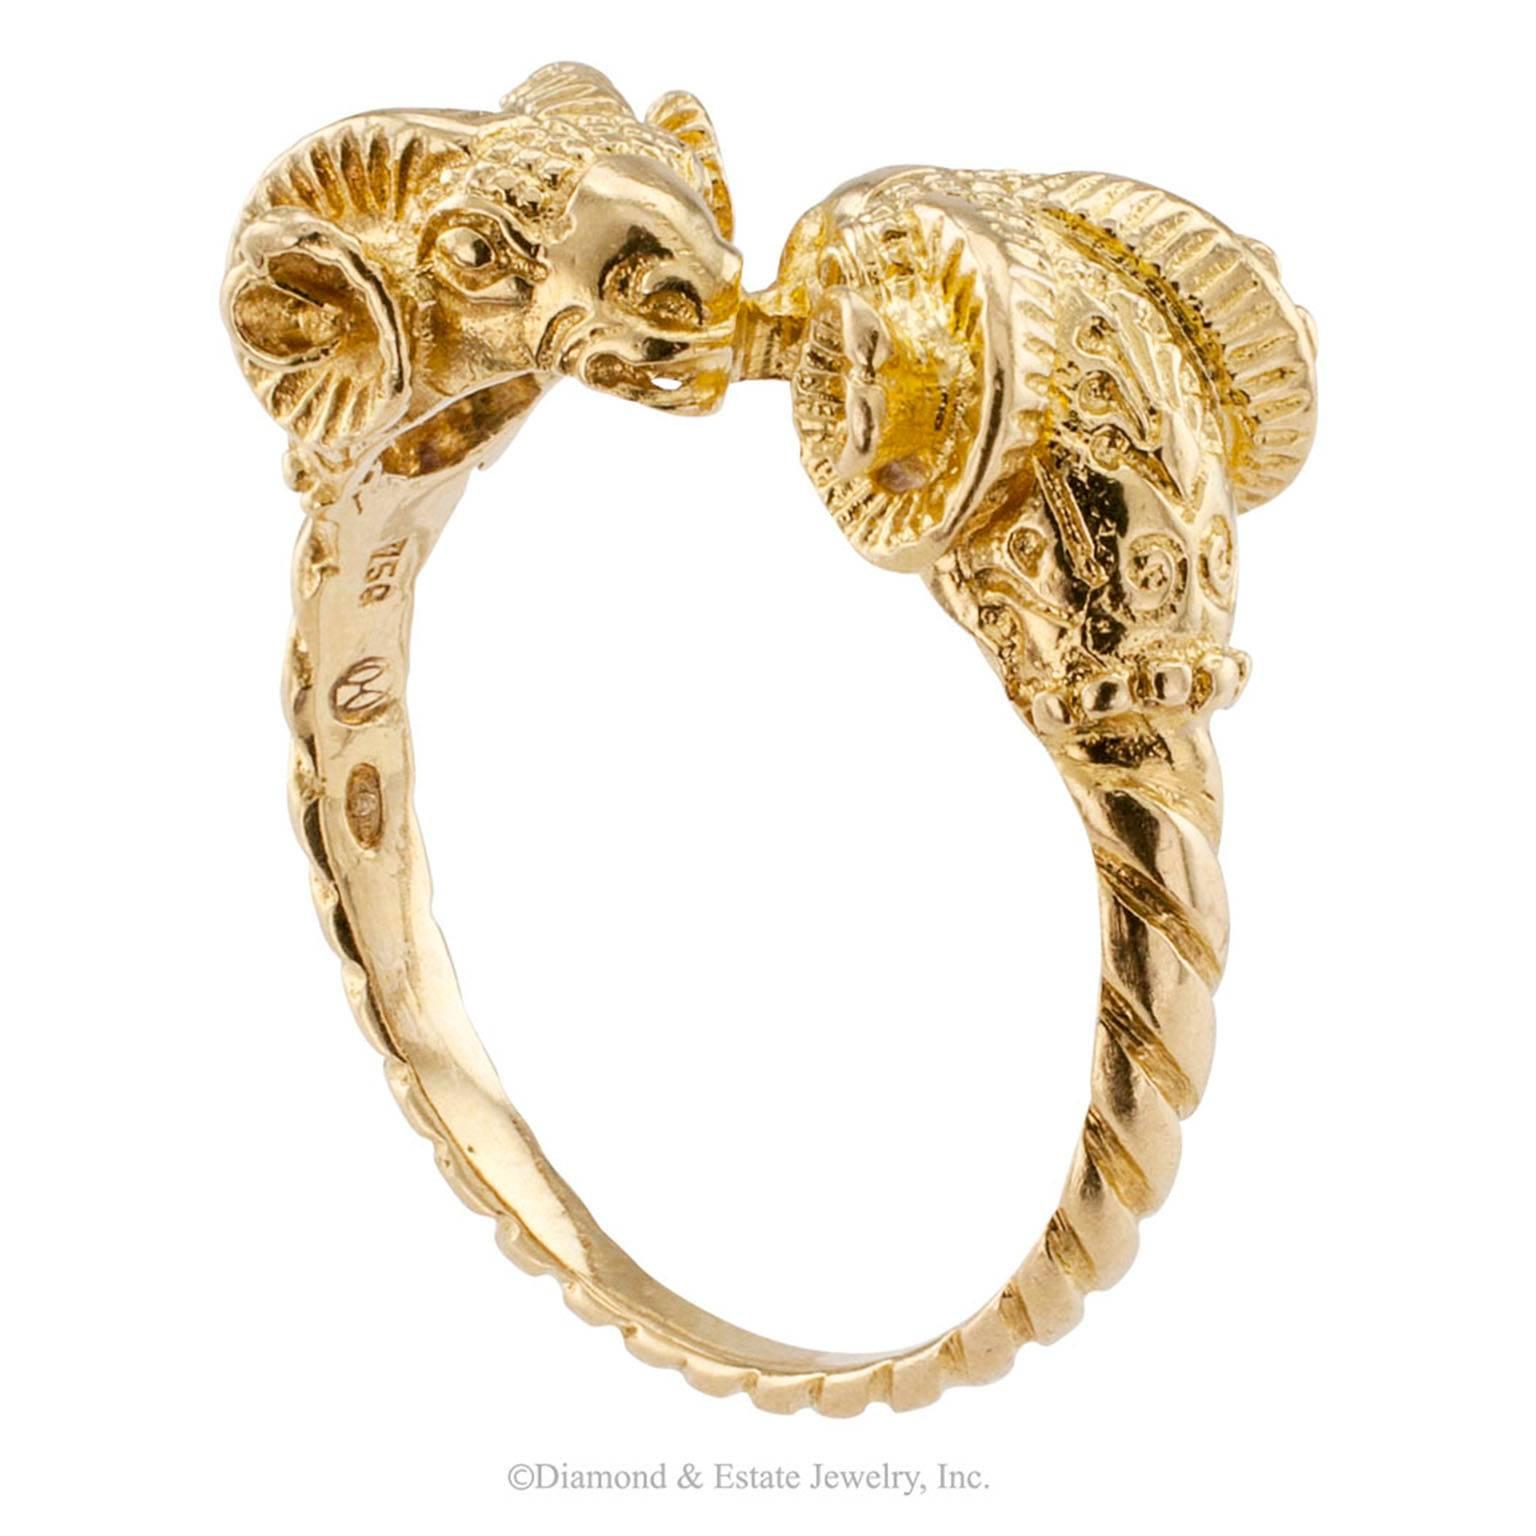 Lalaounis 1980s Twin Ram Heads Ring Gold

Lalaounis 1980s twin ram head ring.  This petite version featuring the iconic twim ram head motif is down right cute, crafted in 18-karat yellow gold with maker's marks for Ilaias Lalaounis.
 
RING SIZE:  6